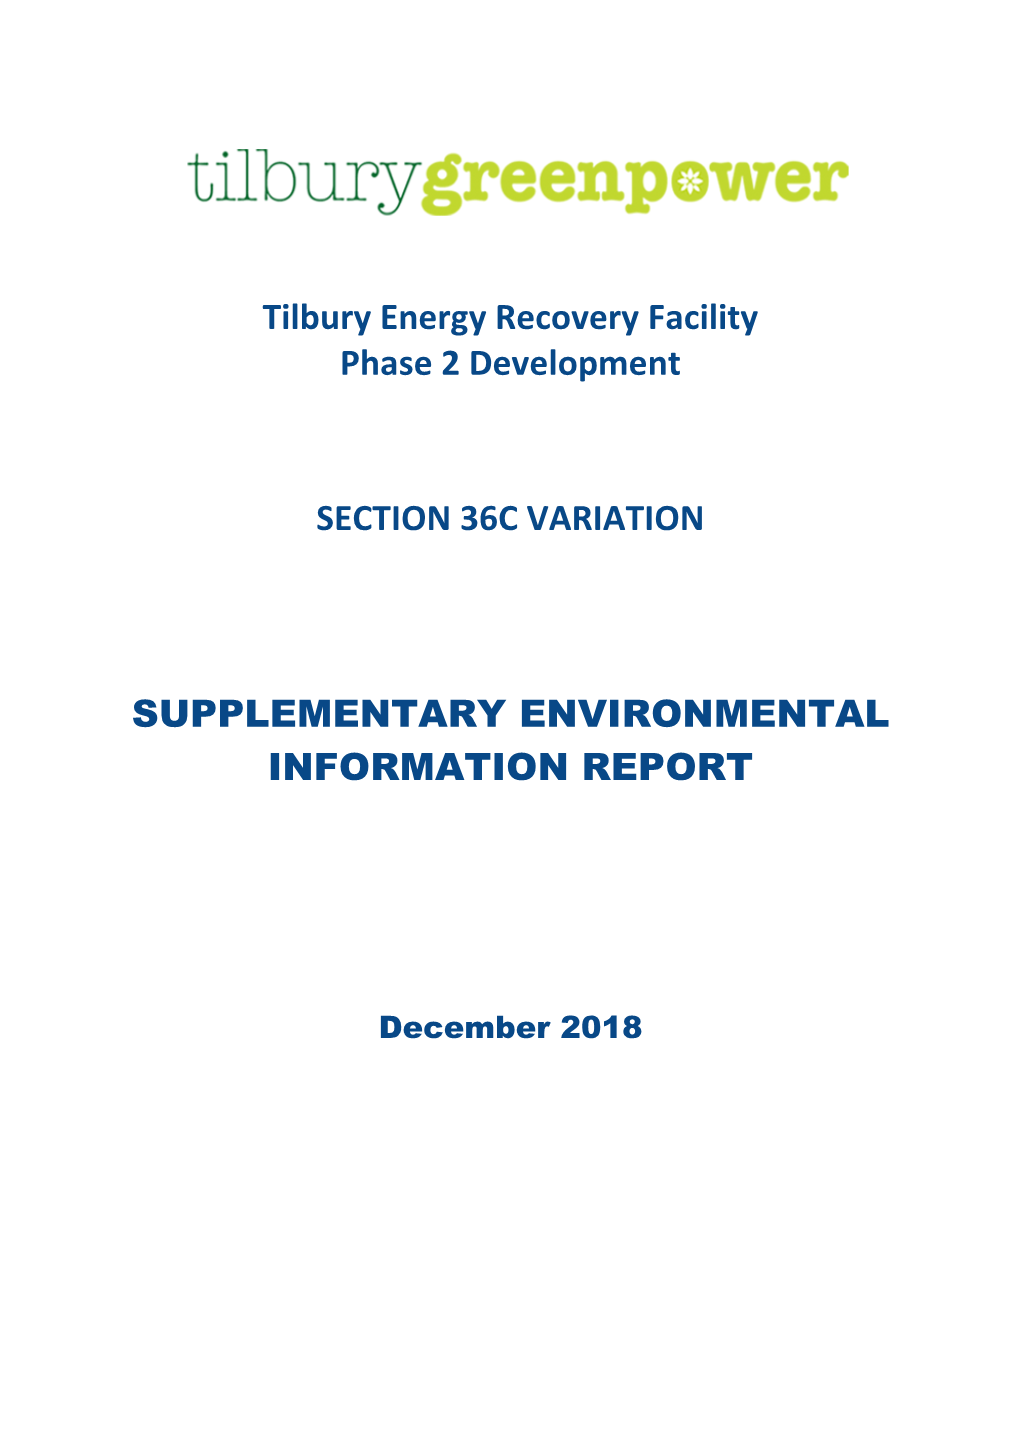 Tilbury Energy Recovery Facility Phase 2 Development SECTION